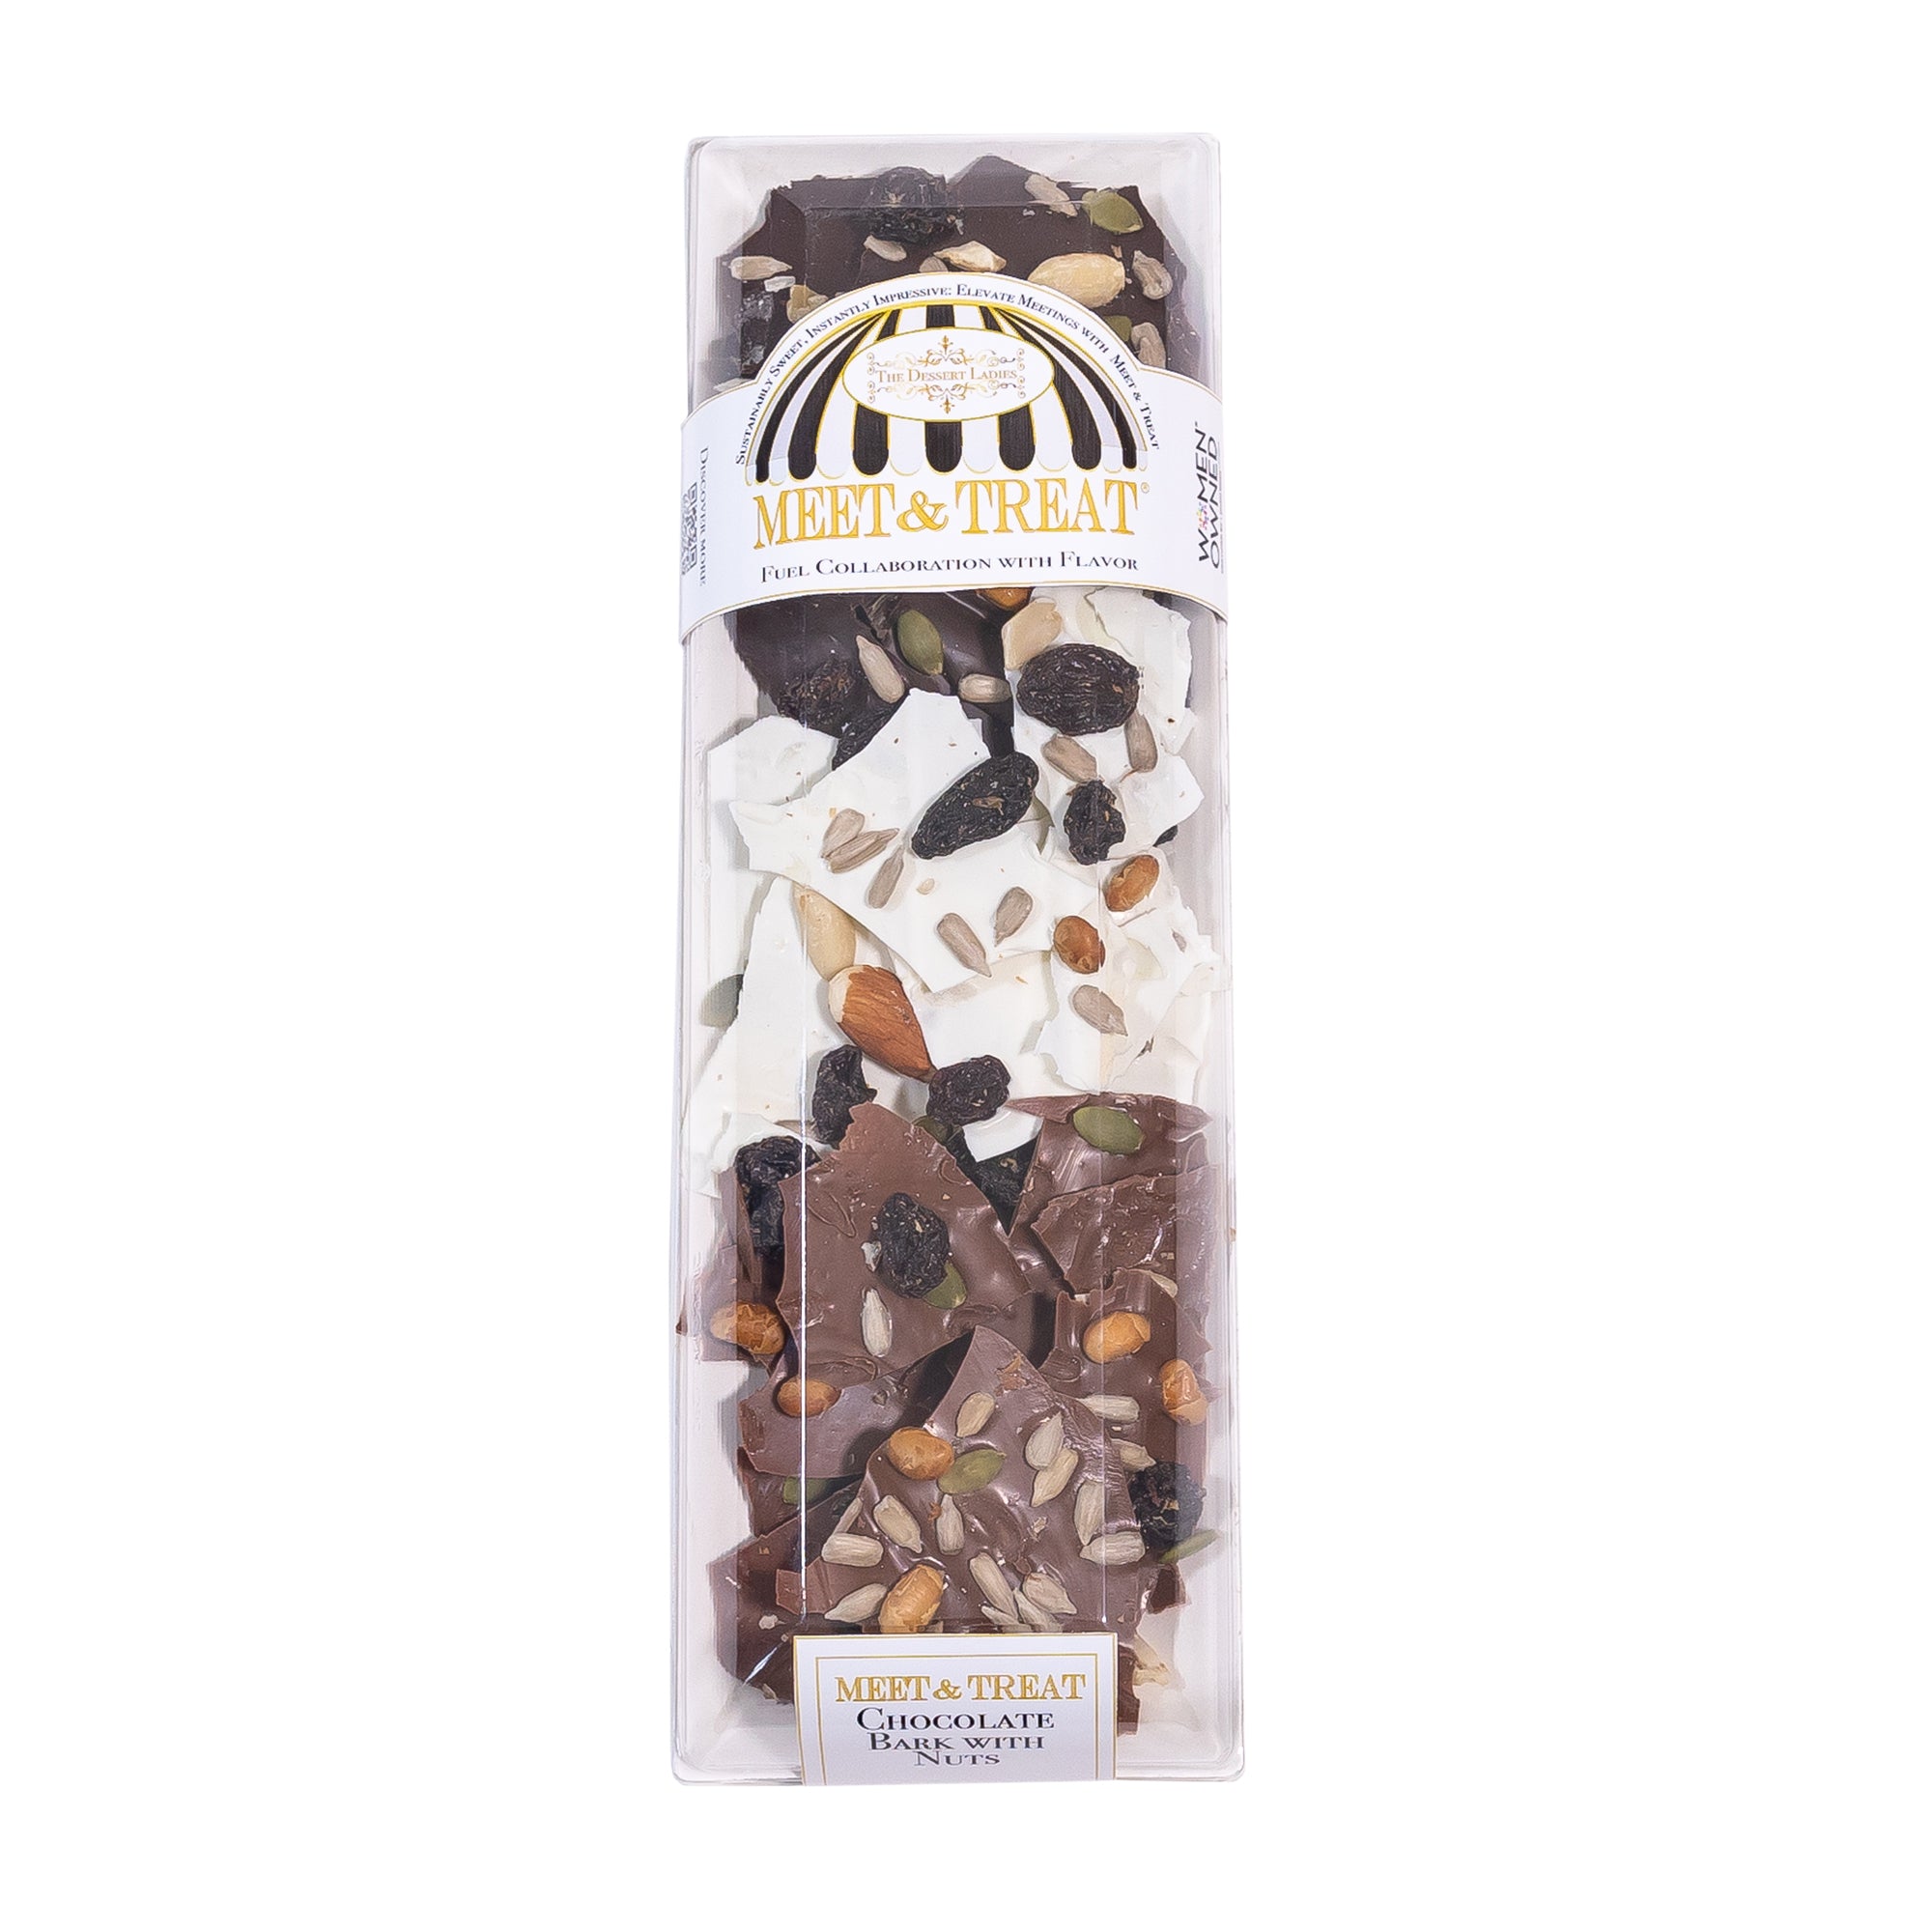 sm chocolate bark with nuts sealed with lid